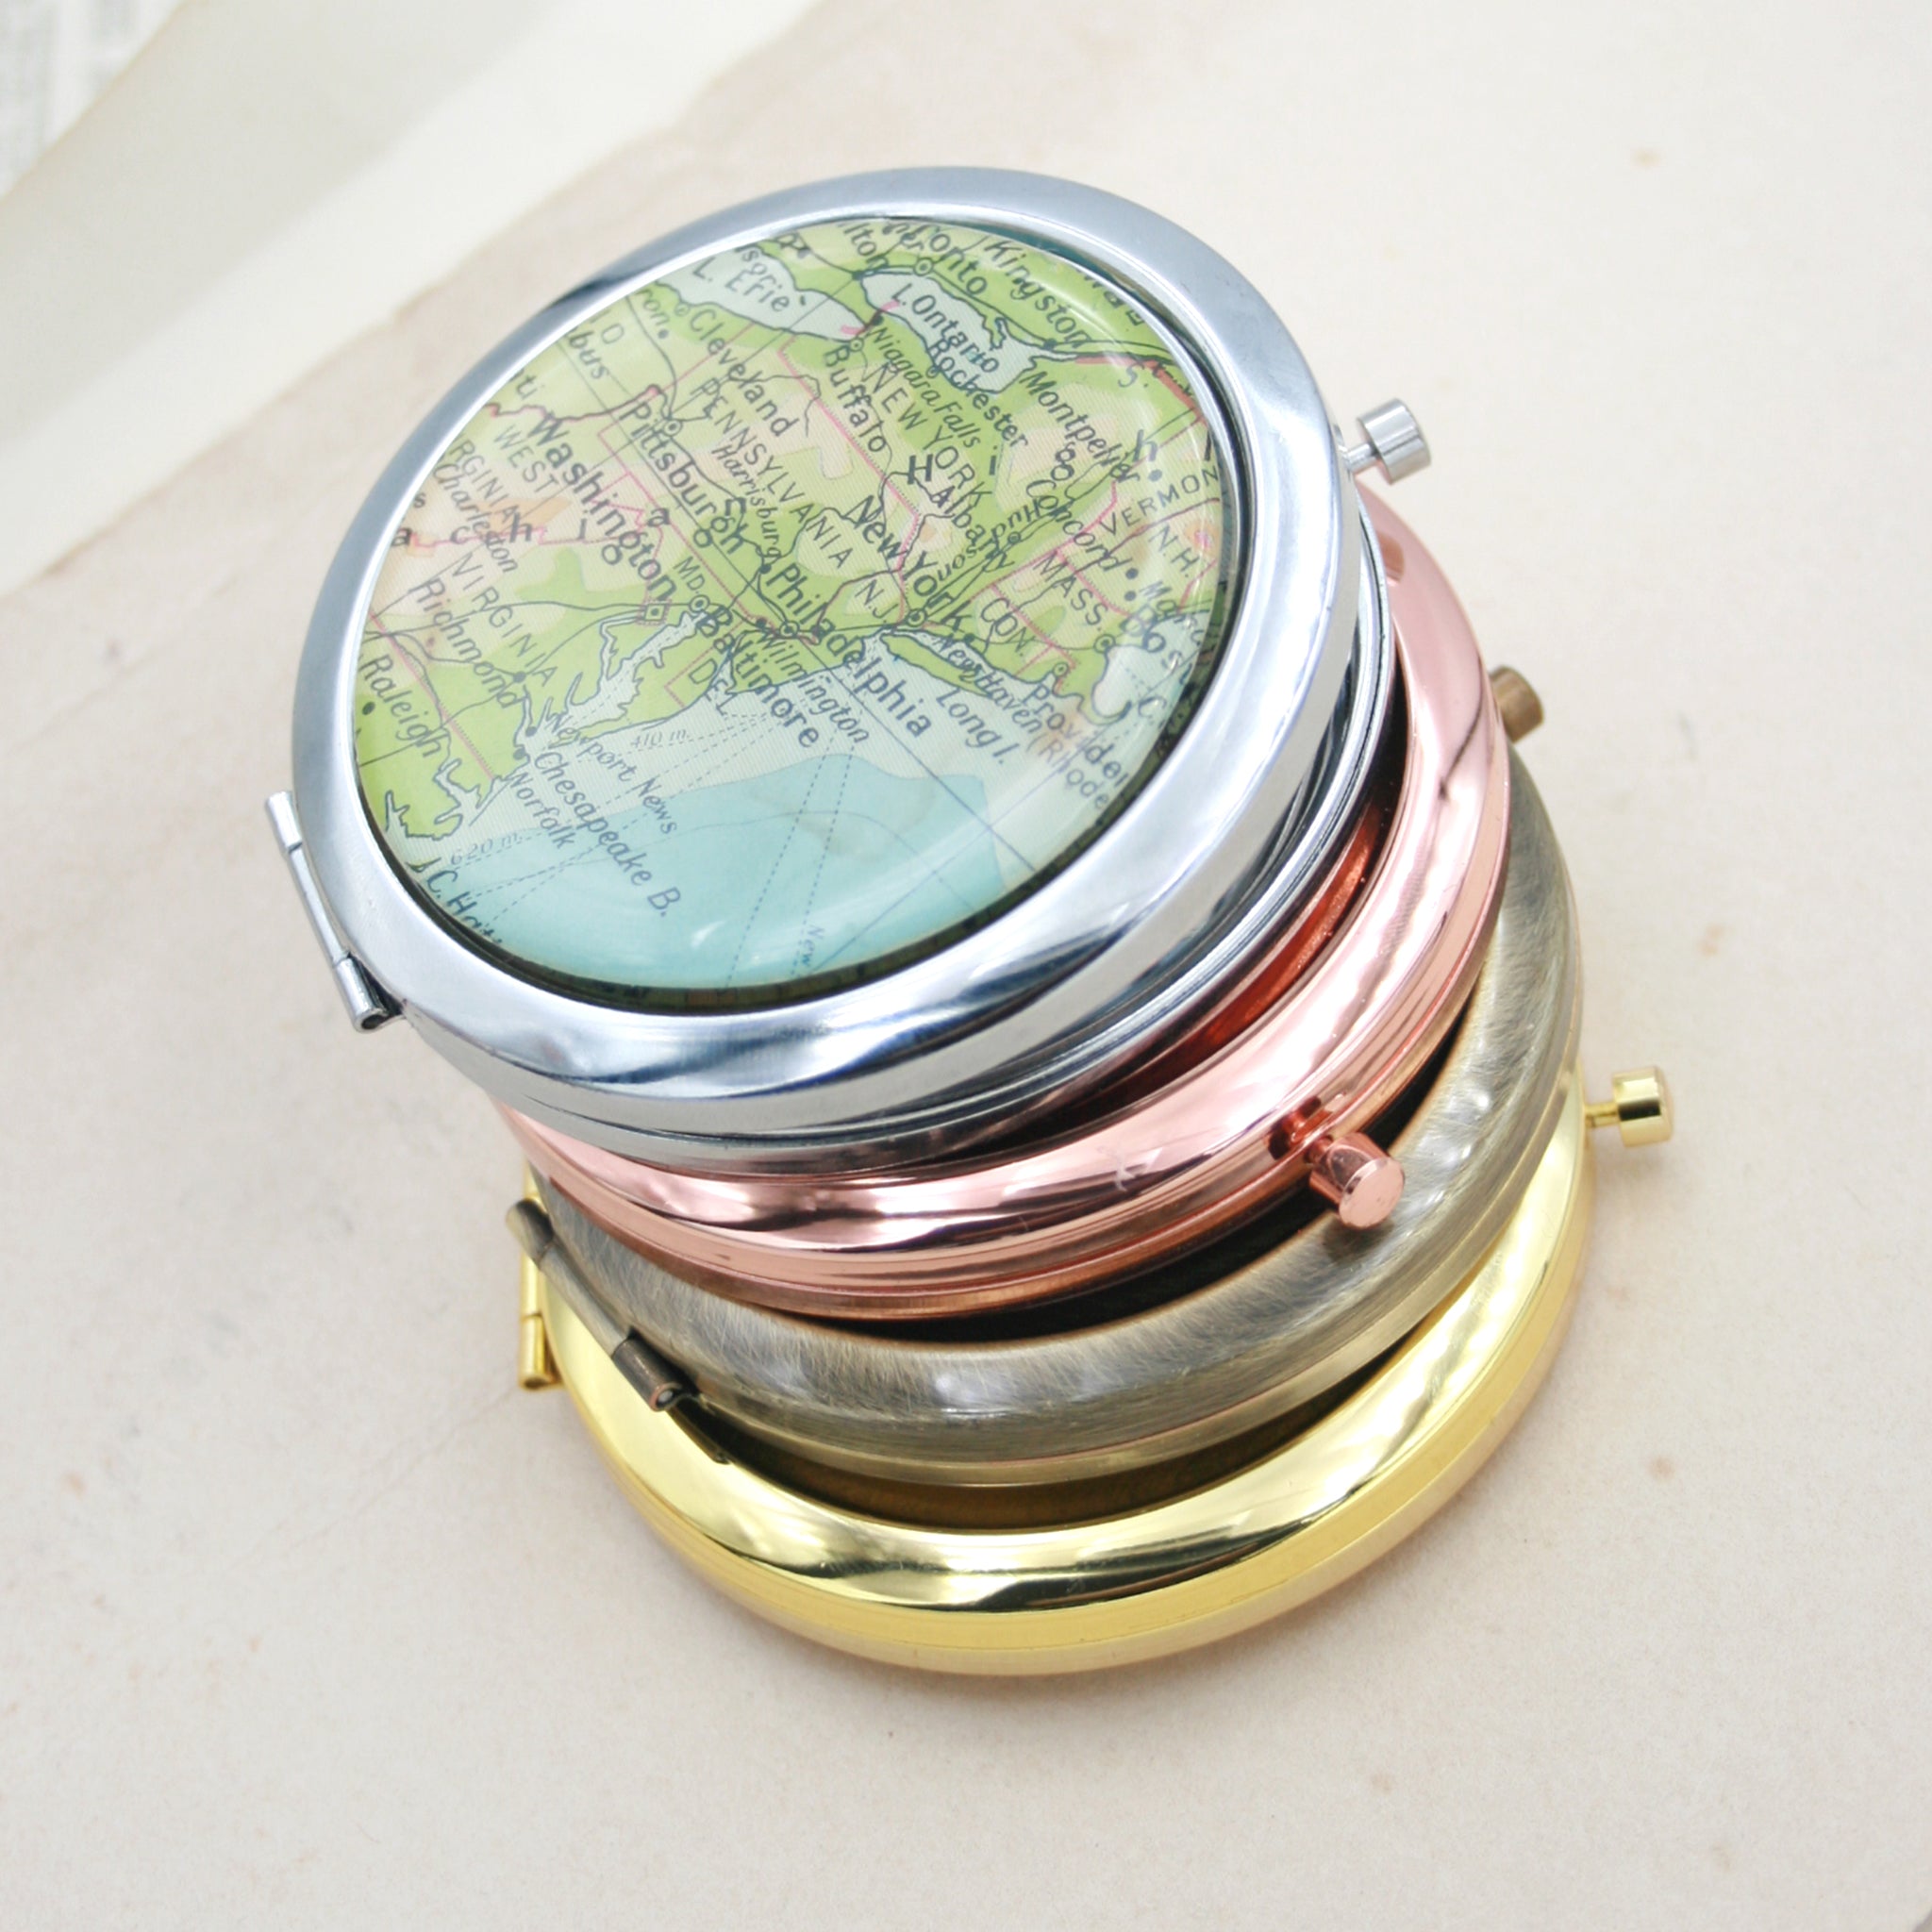 Four compact mirrors one on the another, gold, bronze,rose gold and silver featuring map of New York